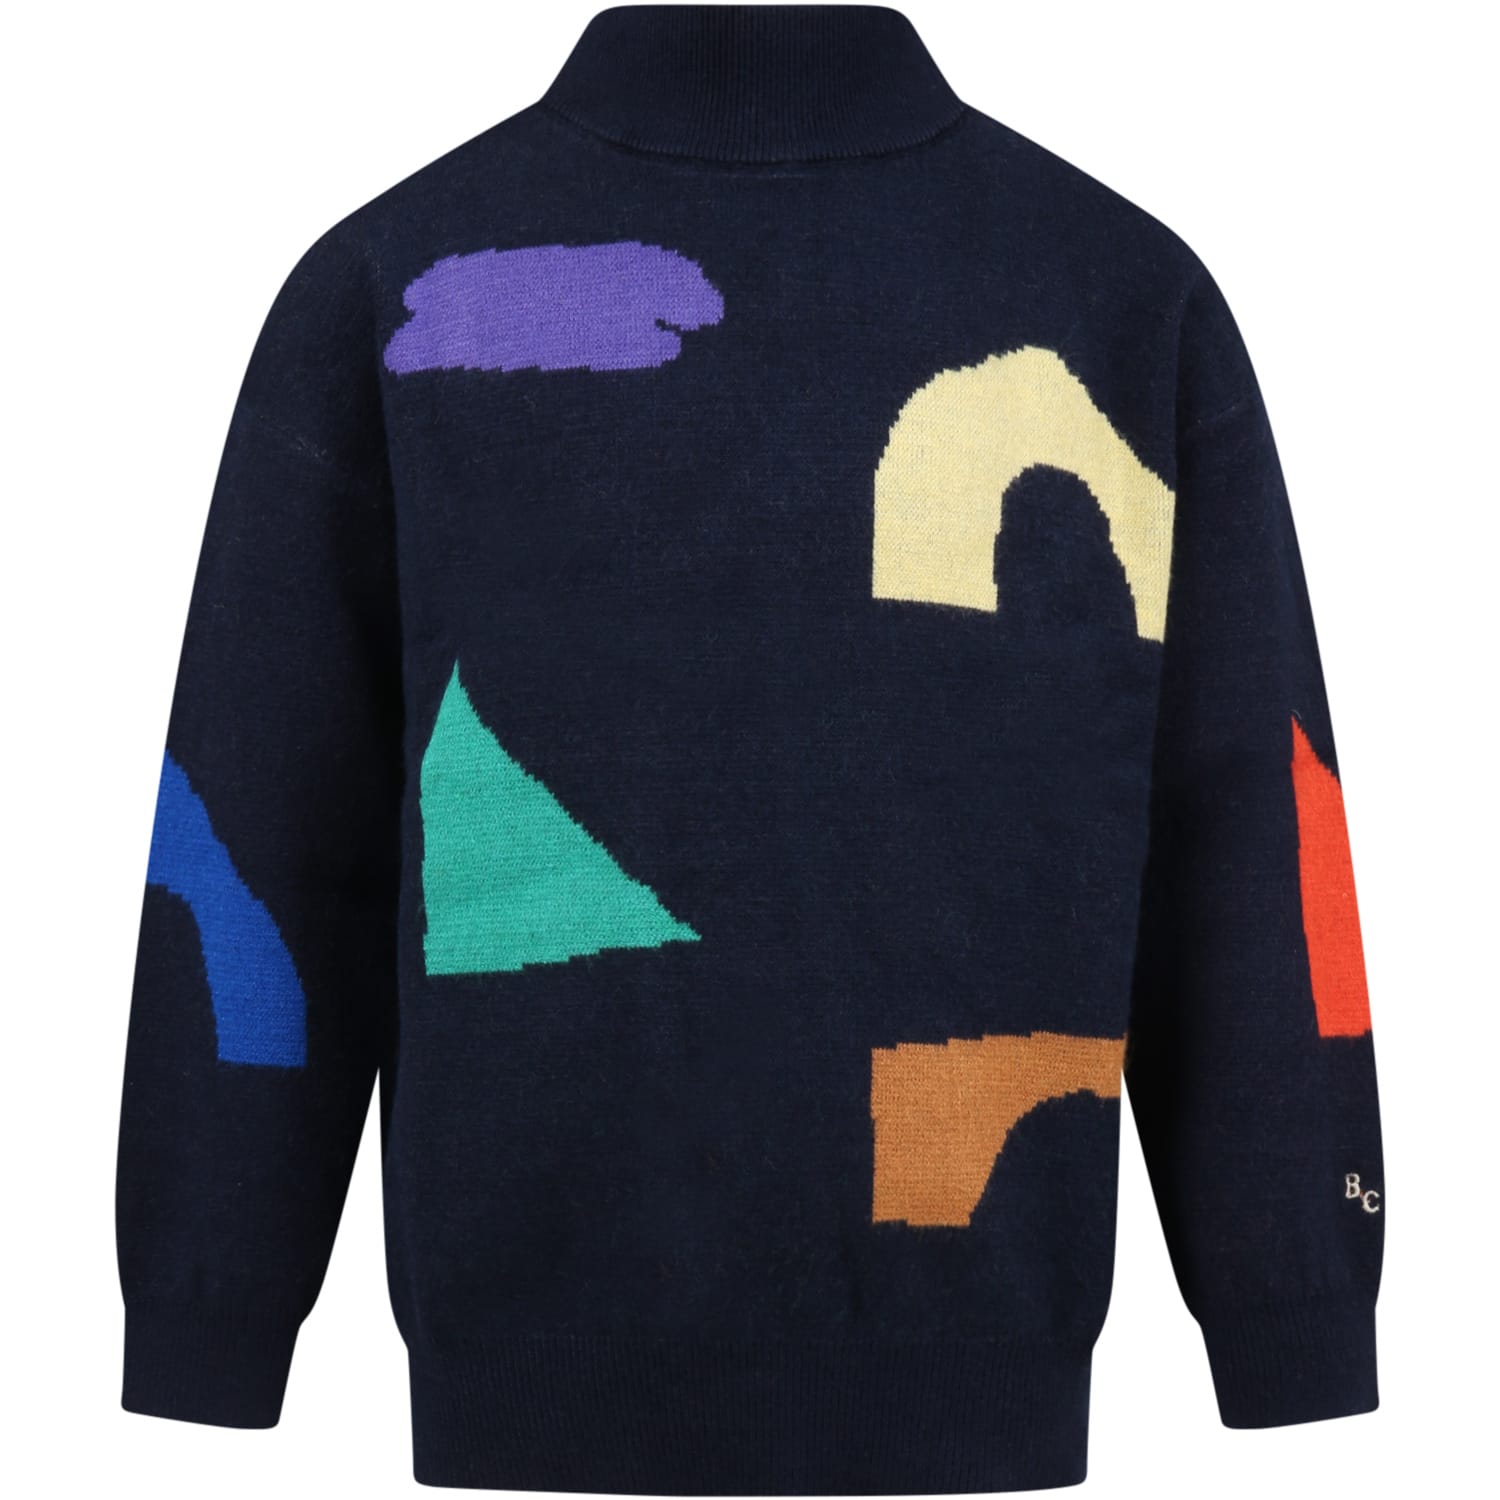 Bobo Choses Blue Turtleneck For Boy With Colorful Designs